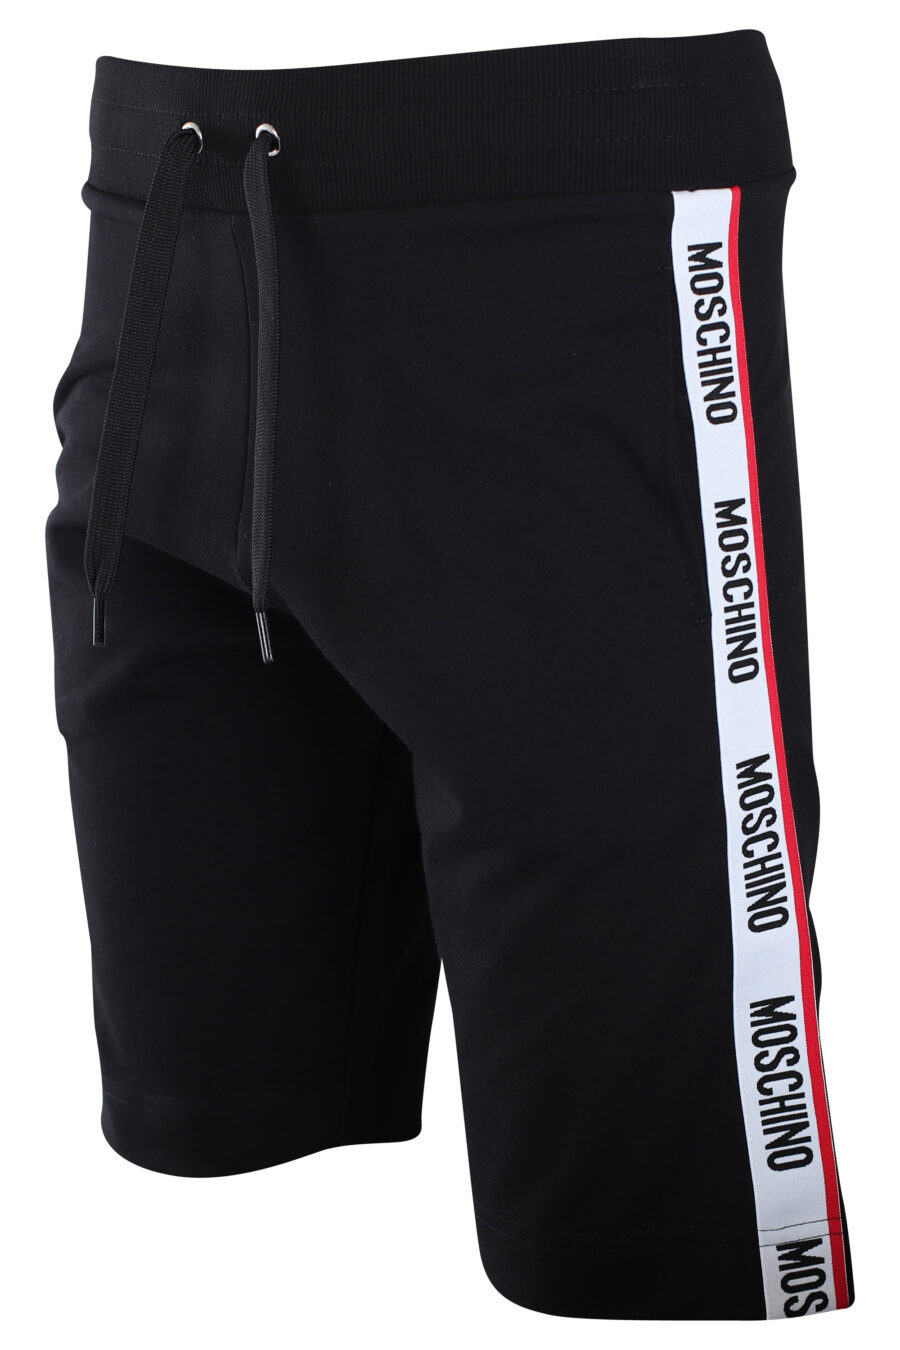 Tracksuit bottoms black with logo on side bands - IMG 2236